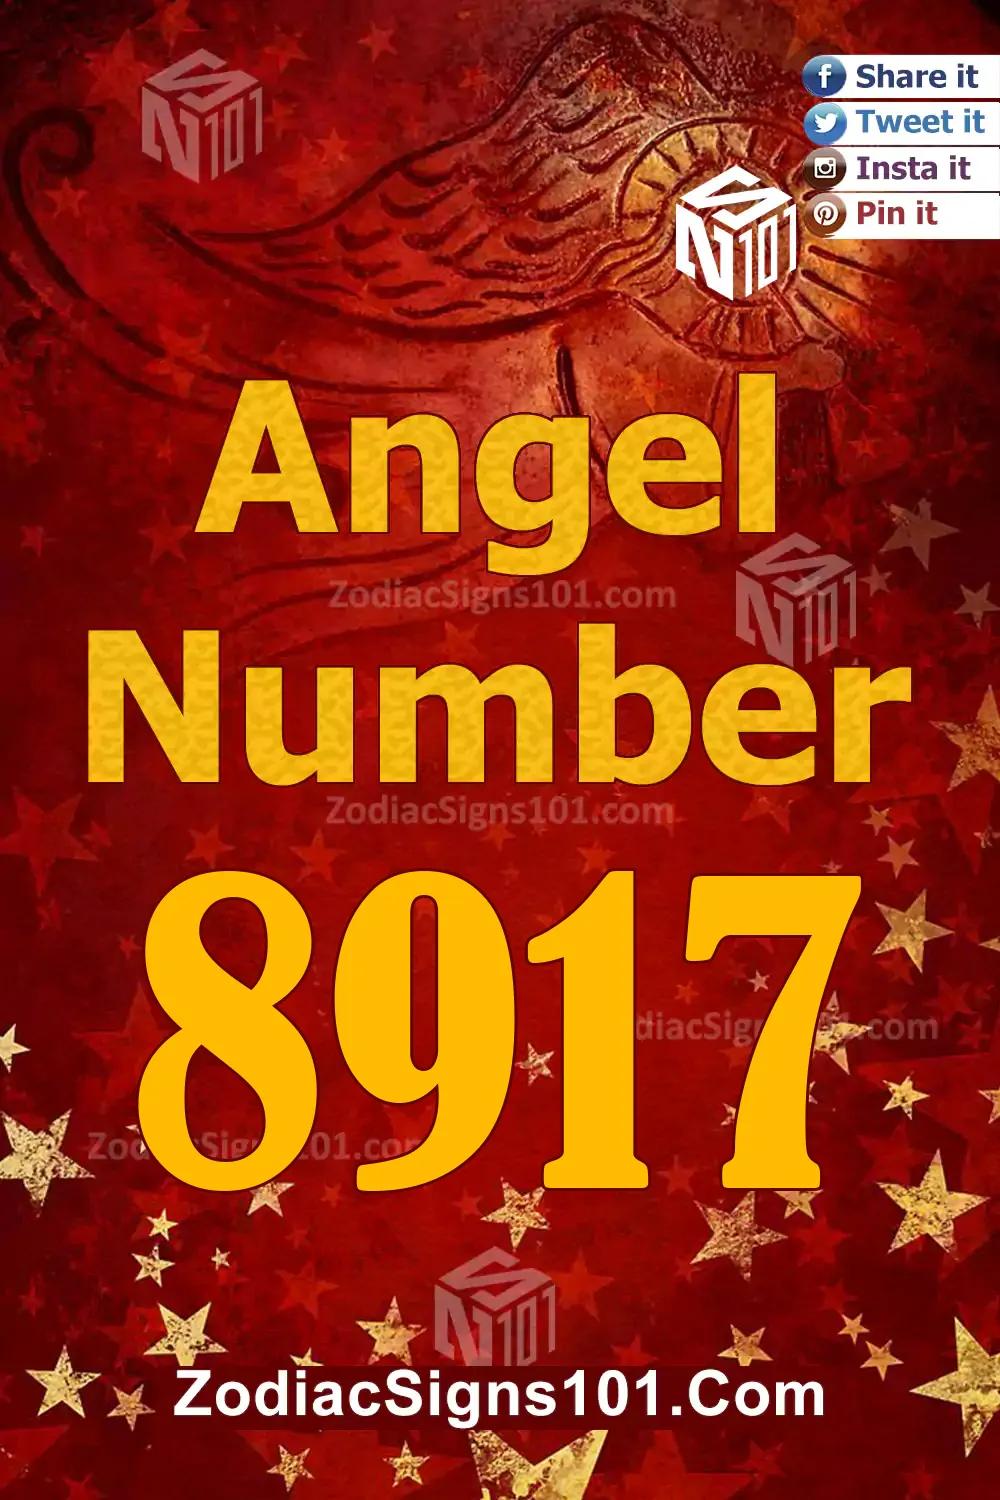 8917 Angel Number Meaning